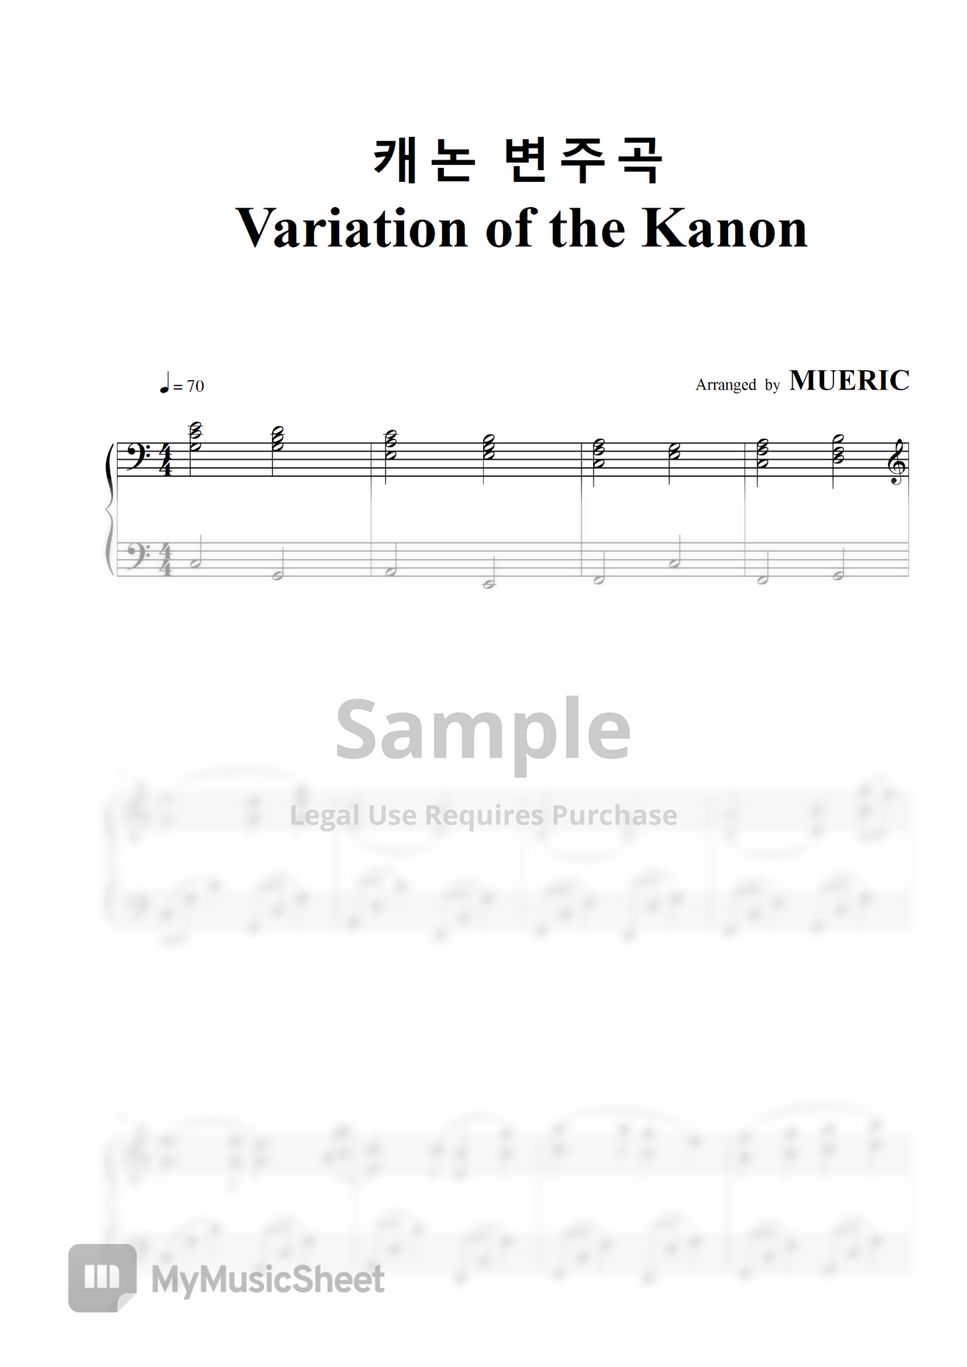 George Winston - Vatiation of the Kanon (Piano ver) by MUERIC